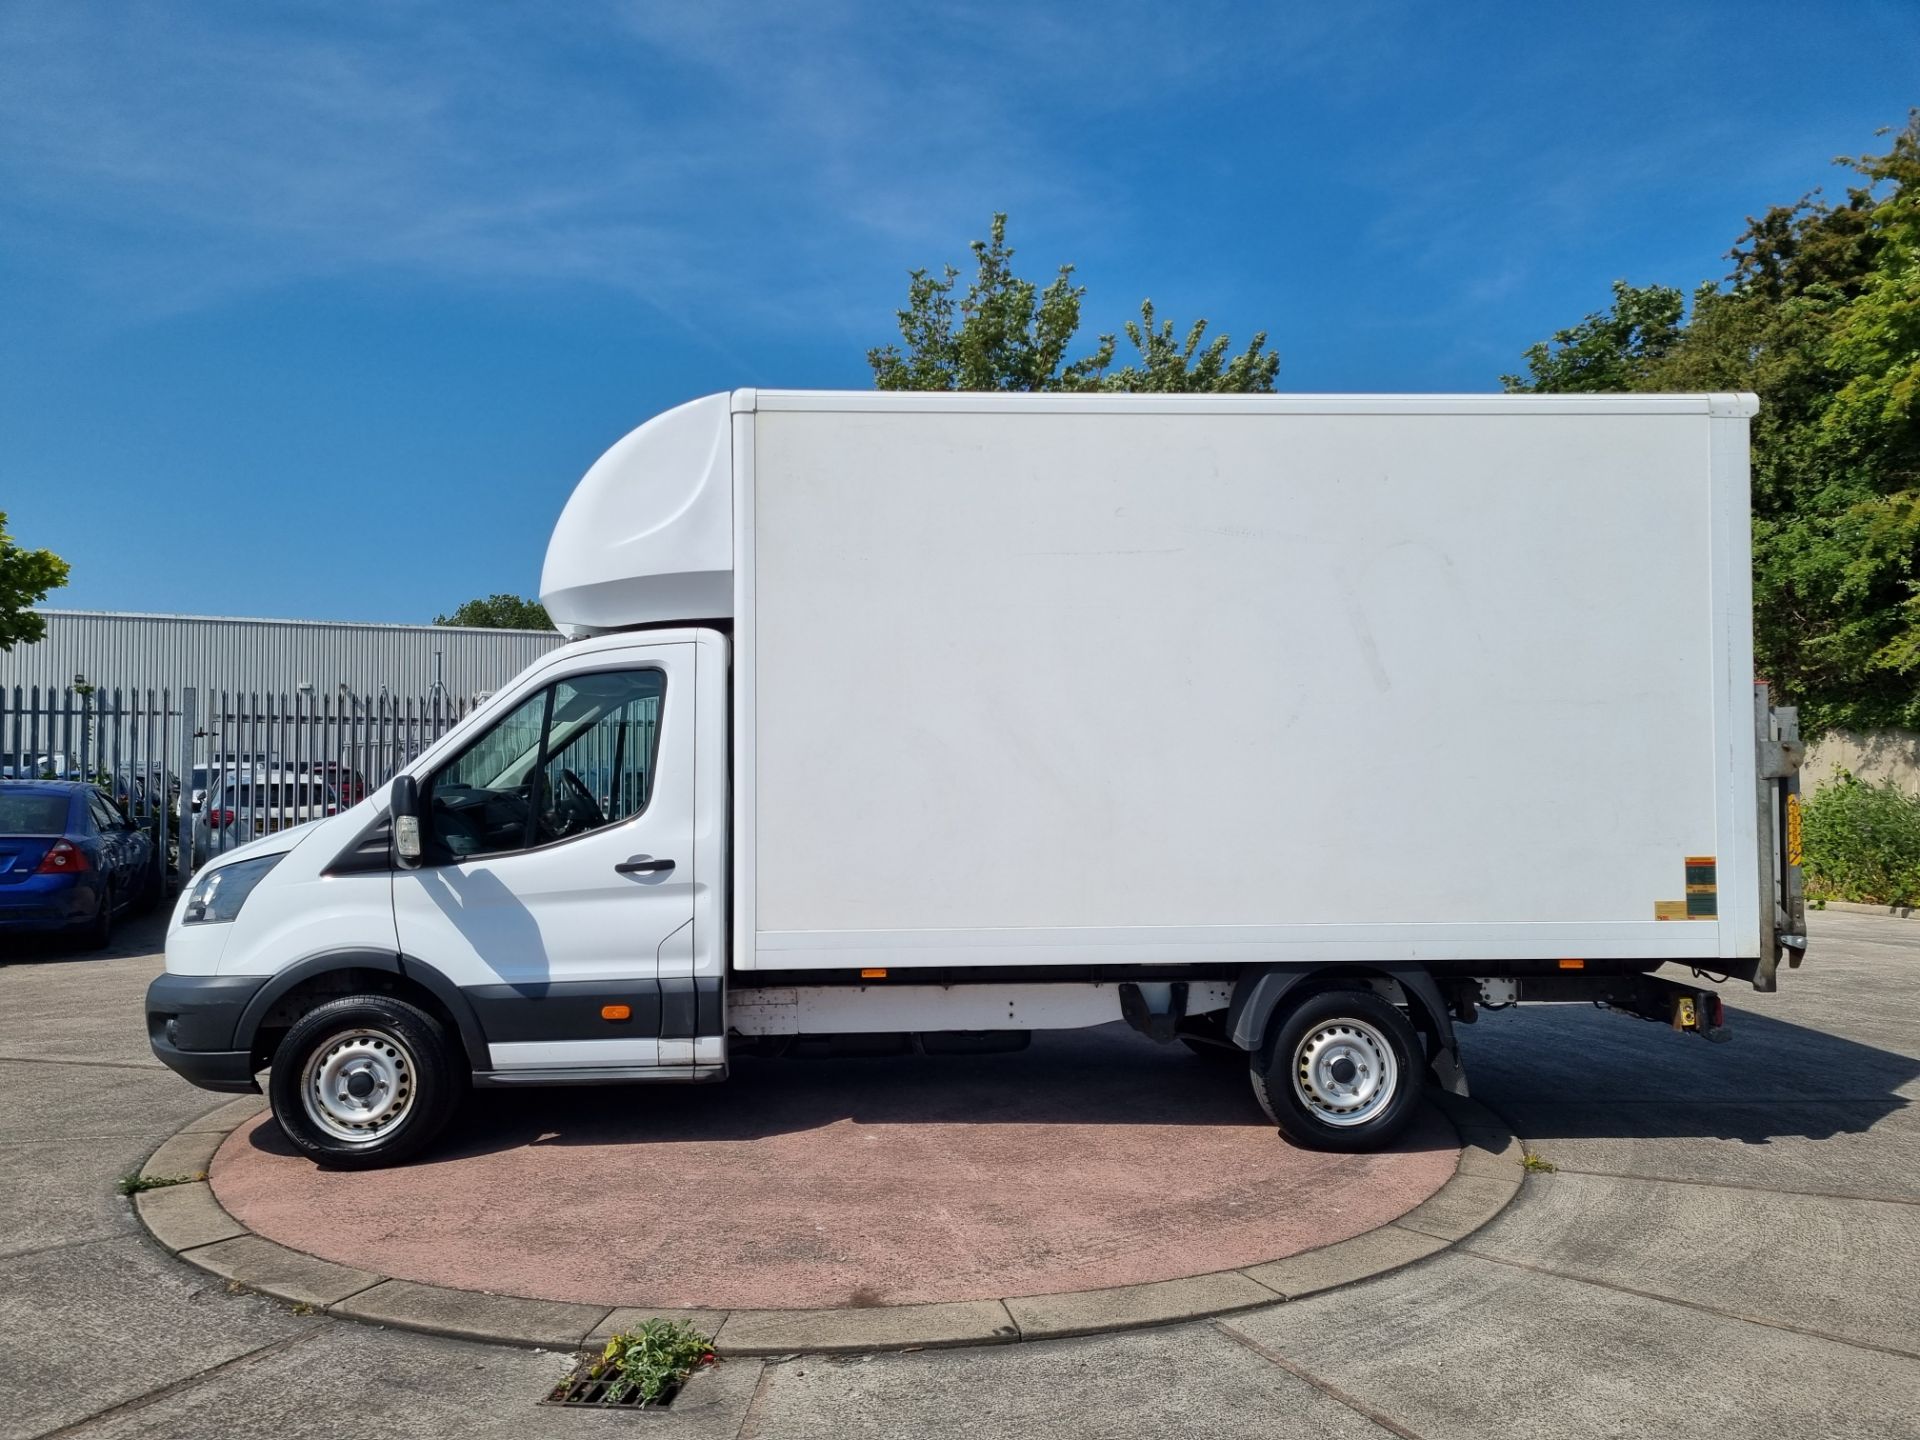 2018 Transit Luton with tail lift - Image 2 of 14